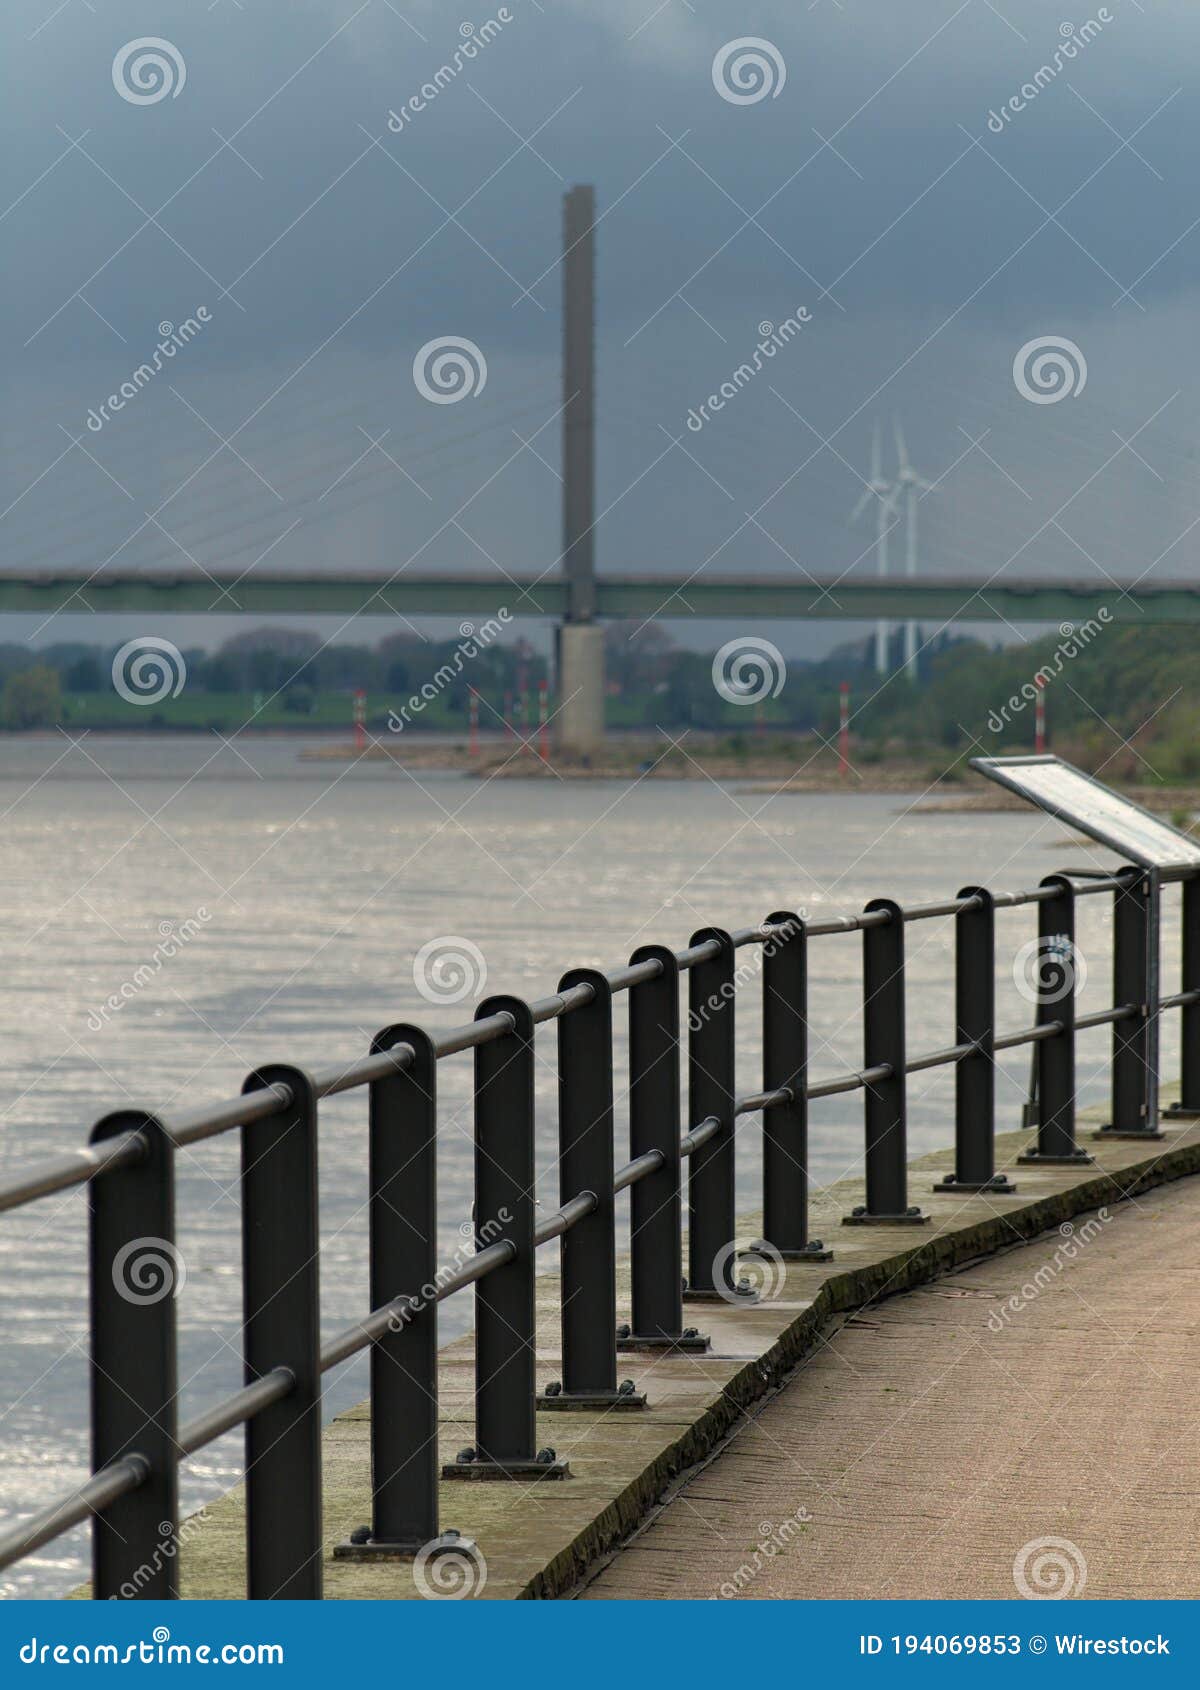 Bridge Leading Over the River Rhine in Rees, Steel Railing in Focused  Foreground Stock Image - Image of rainy, metal: 194069853